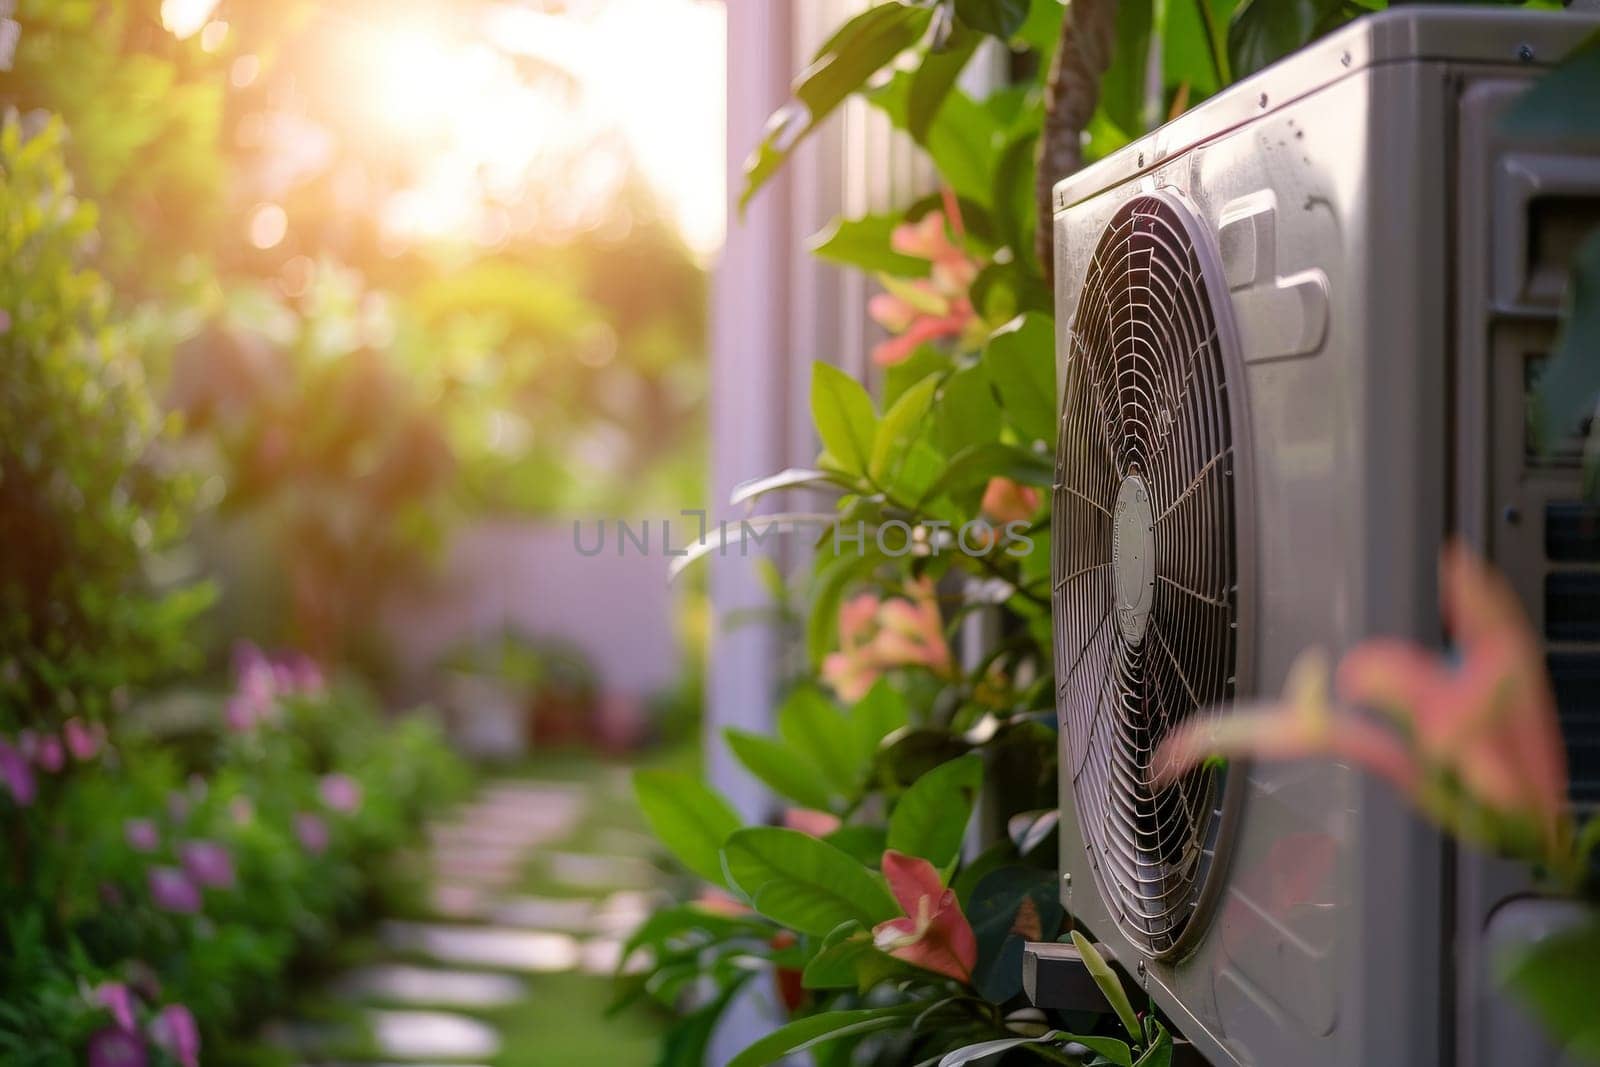 Air compressor, Air conditioning unit in a garden during summer.